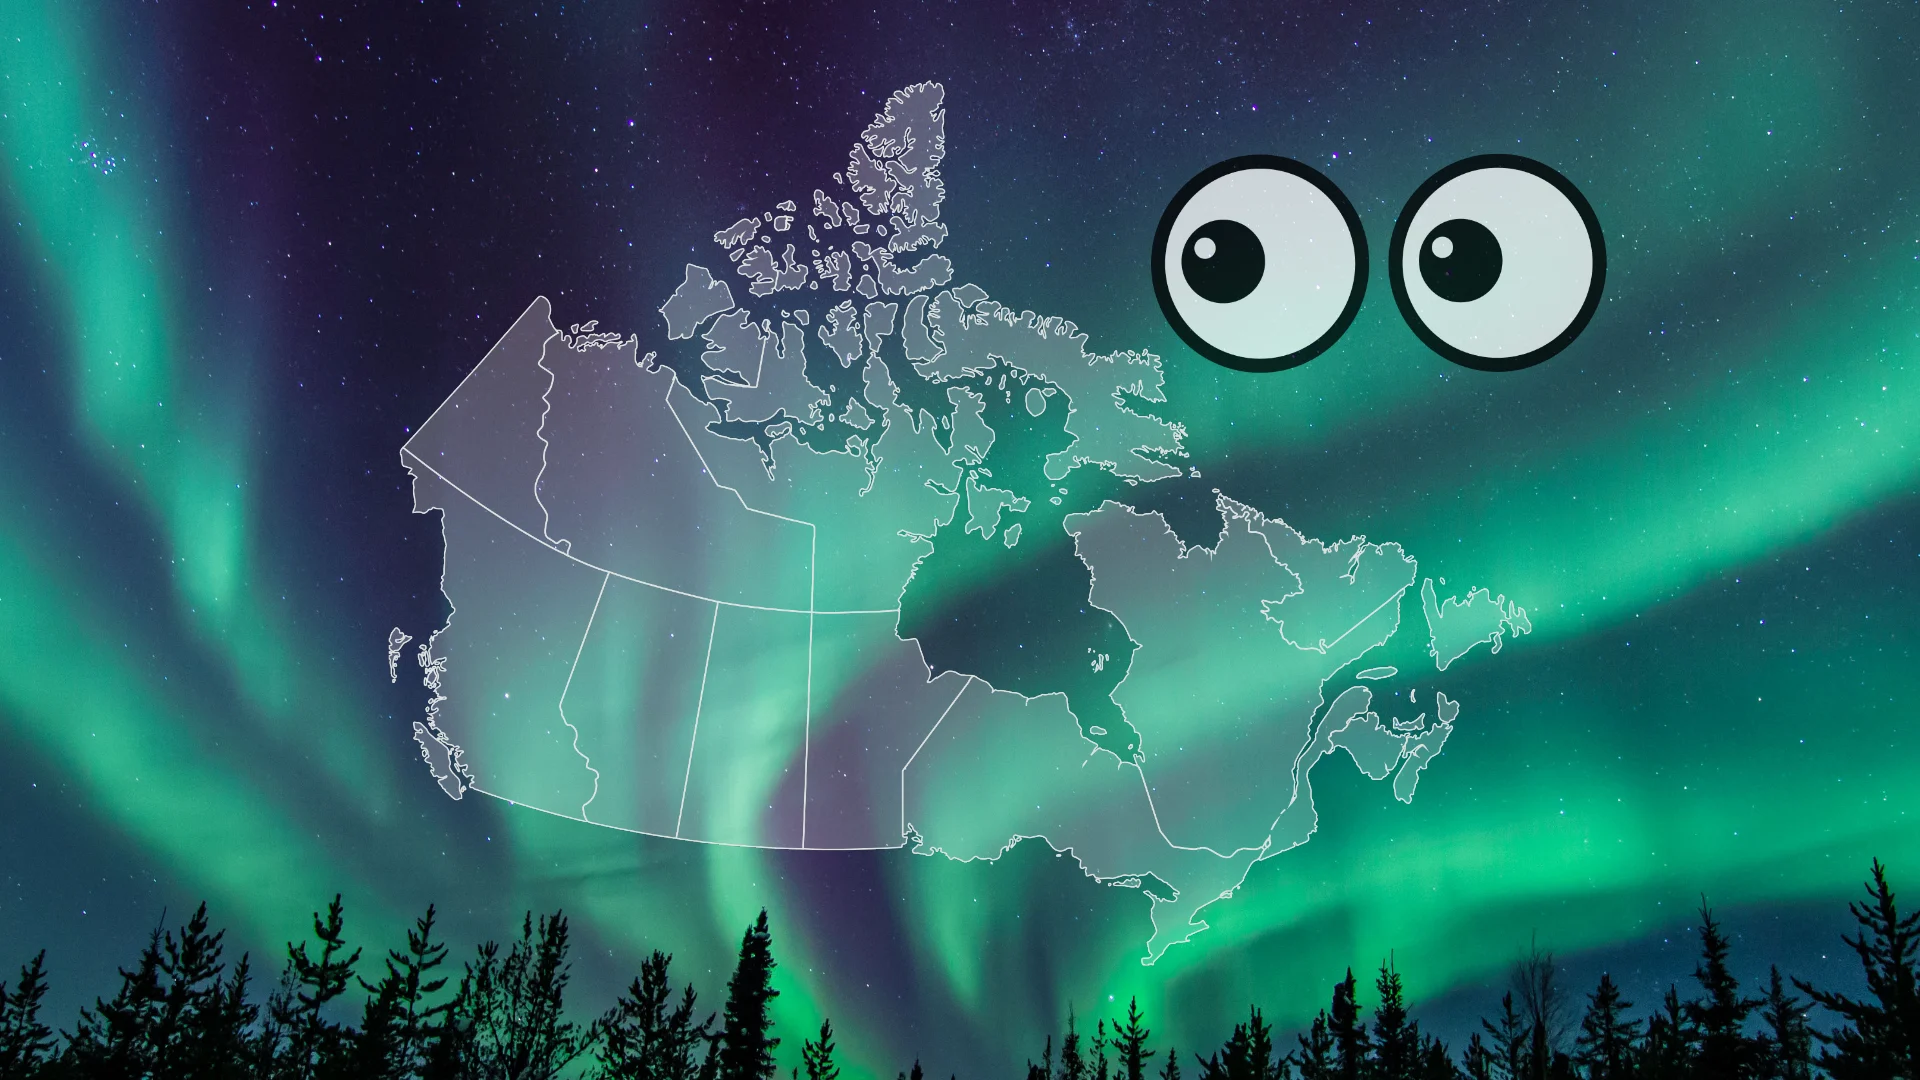 Saskatchewan could have a front-row seat to a dazzling aurora Friday night as a ‘severe’ geomagnetic storm reaches Earth. Timing, details here